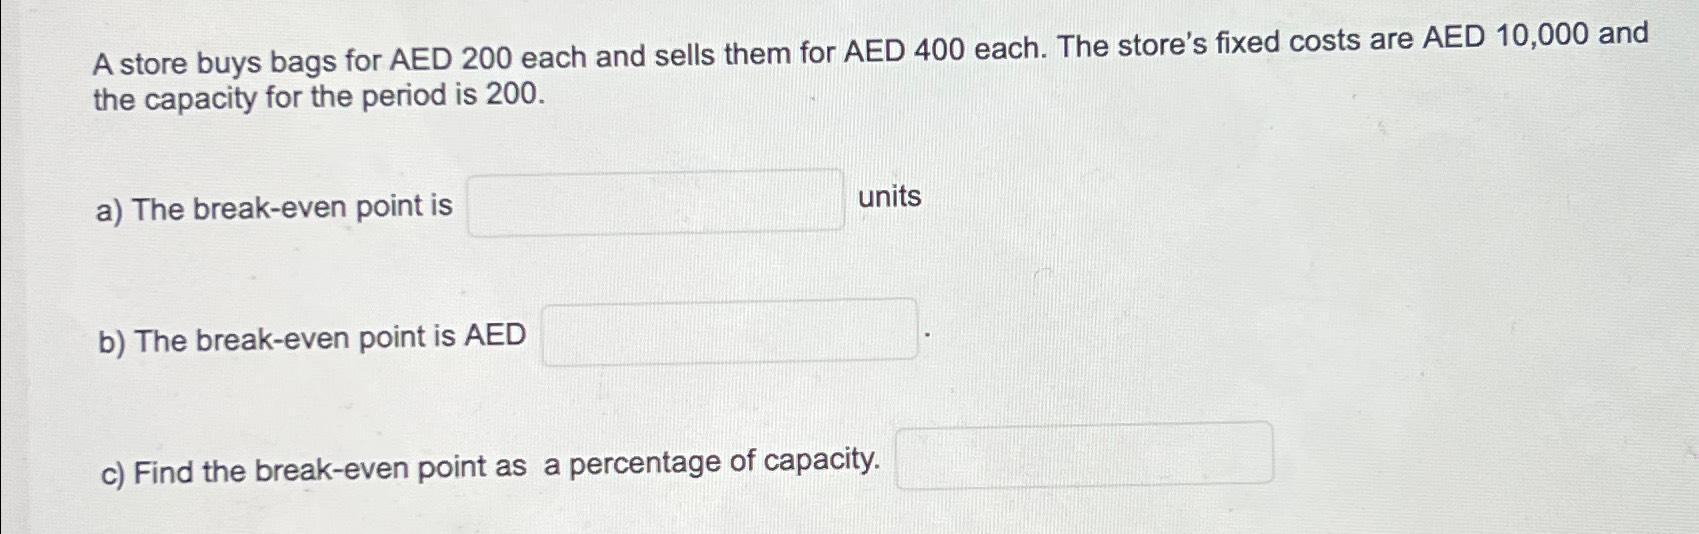 A store buys bags for AED 200 each and sells them for AED 400 each. The store's fixed costs are AED 10,000